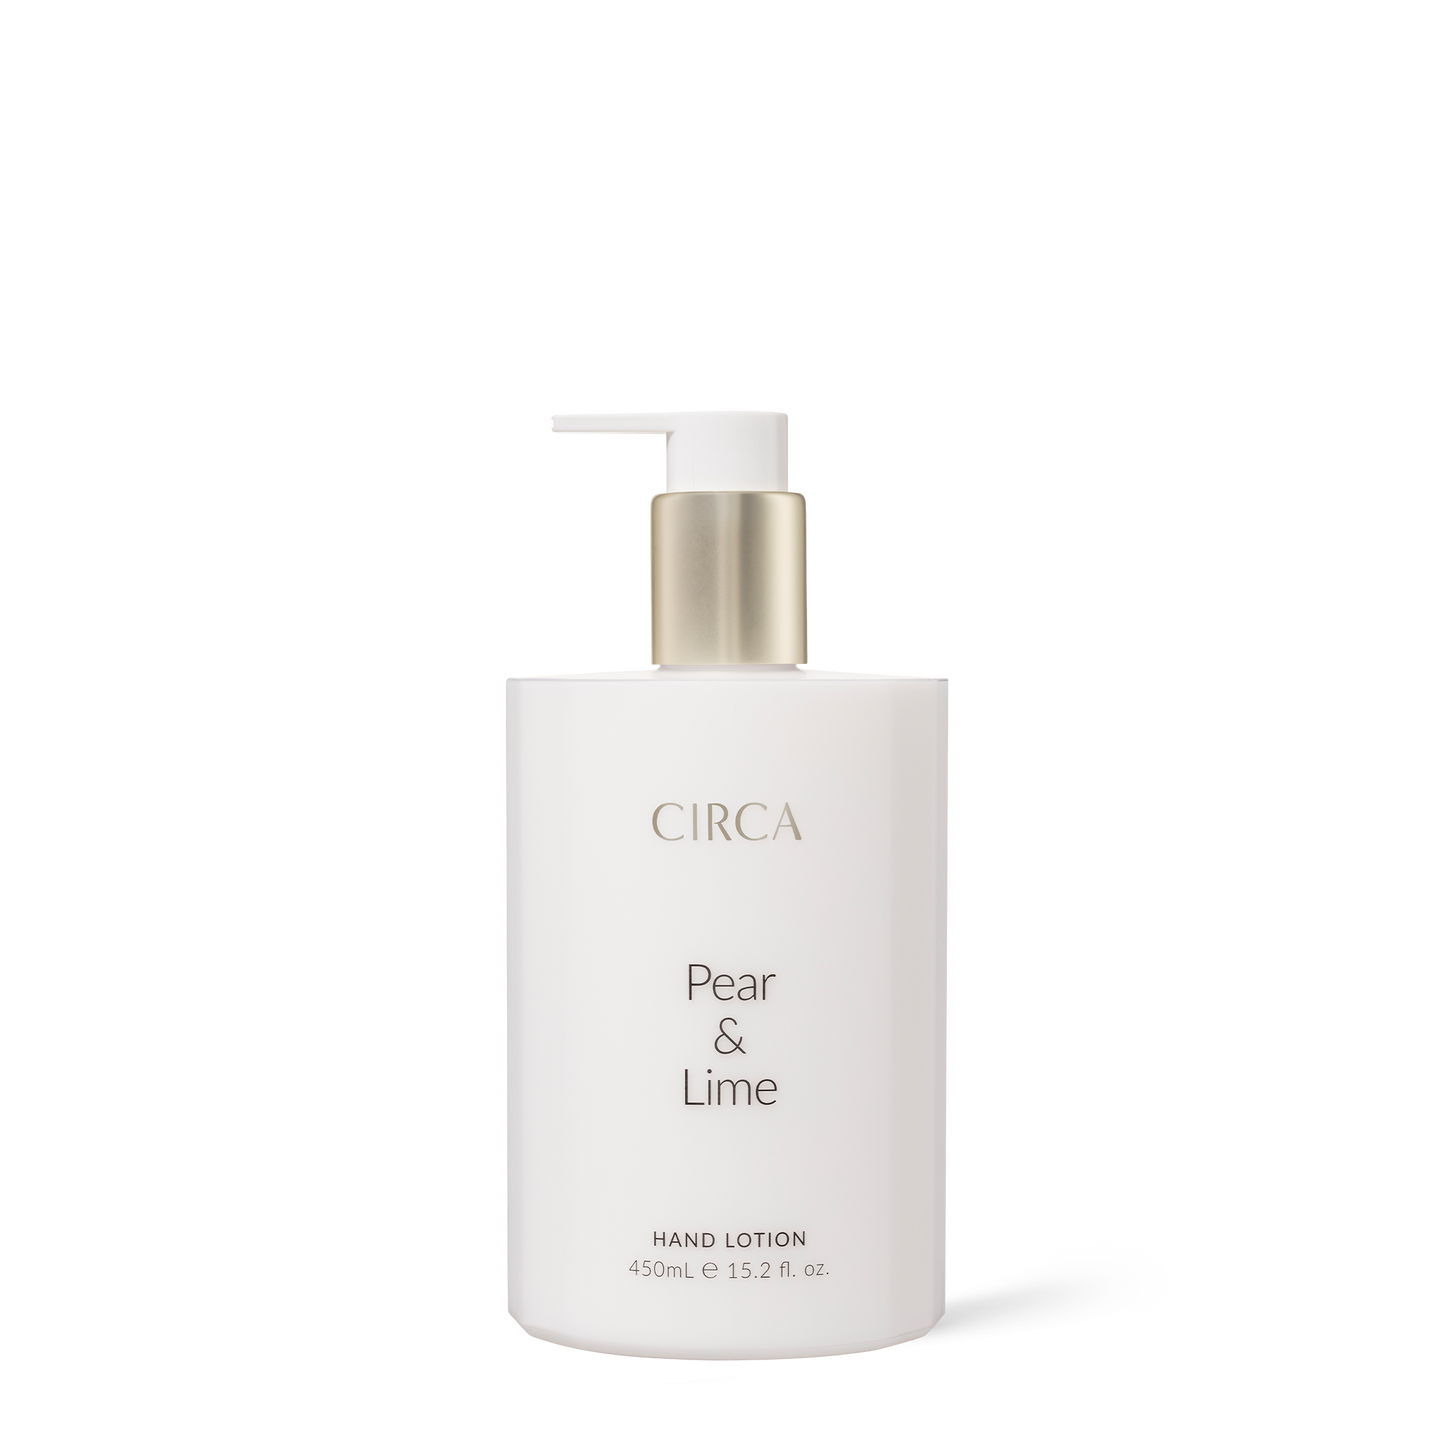 Pear & Lime Hand Lotion